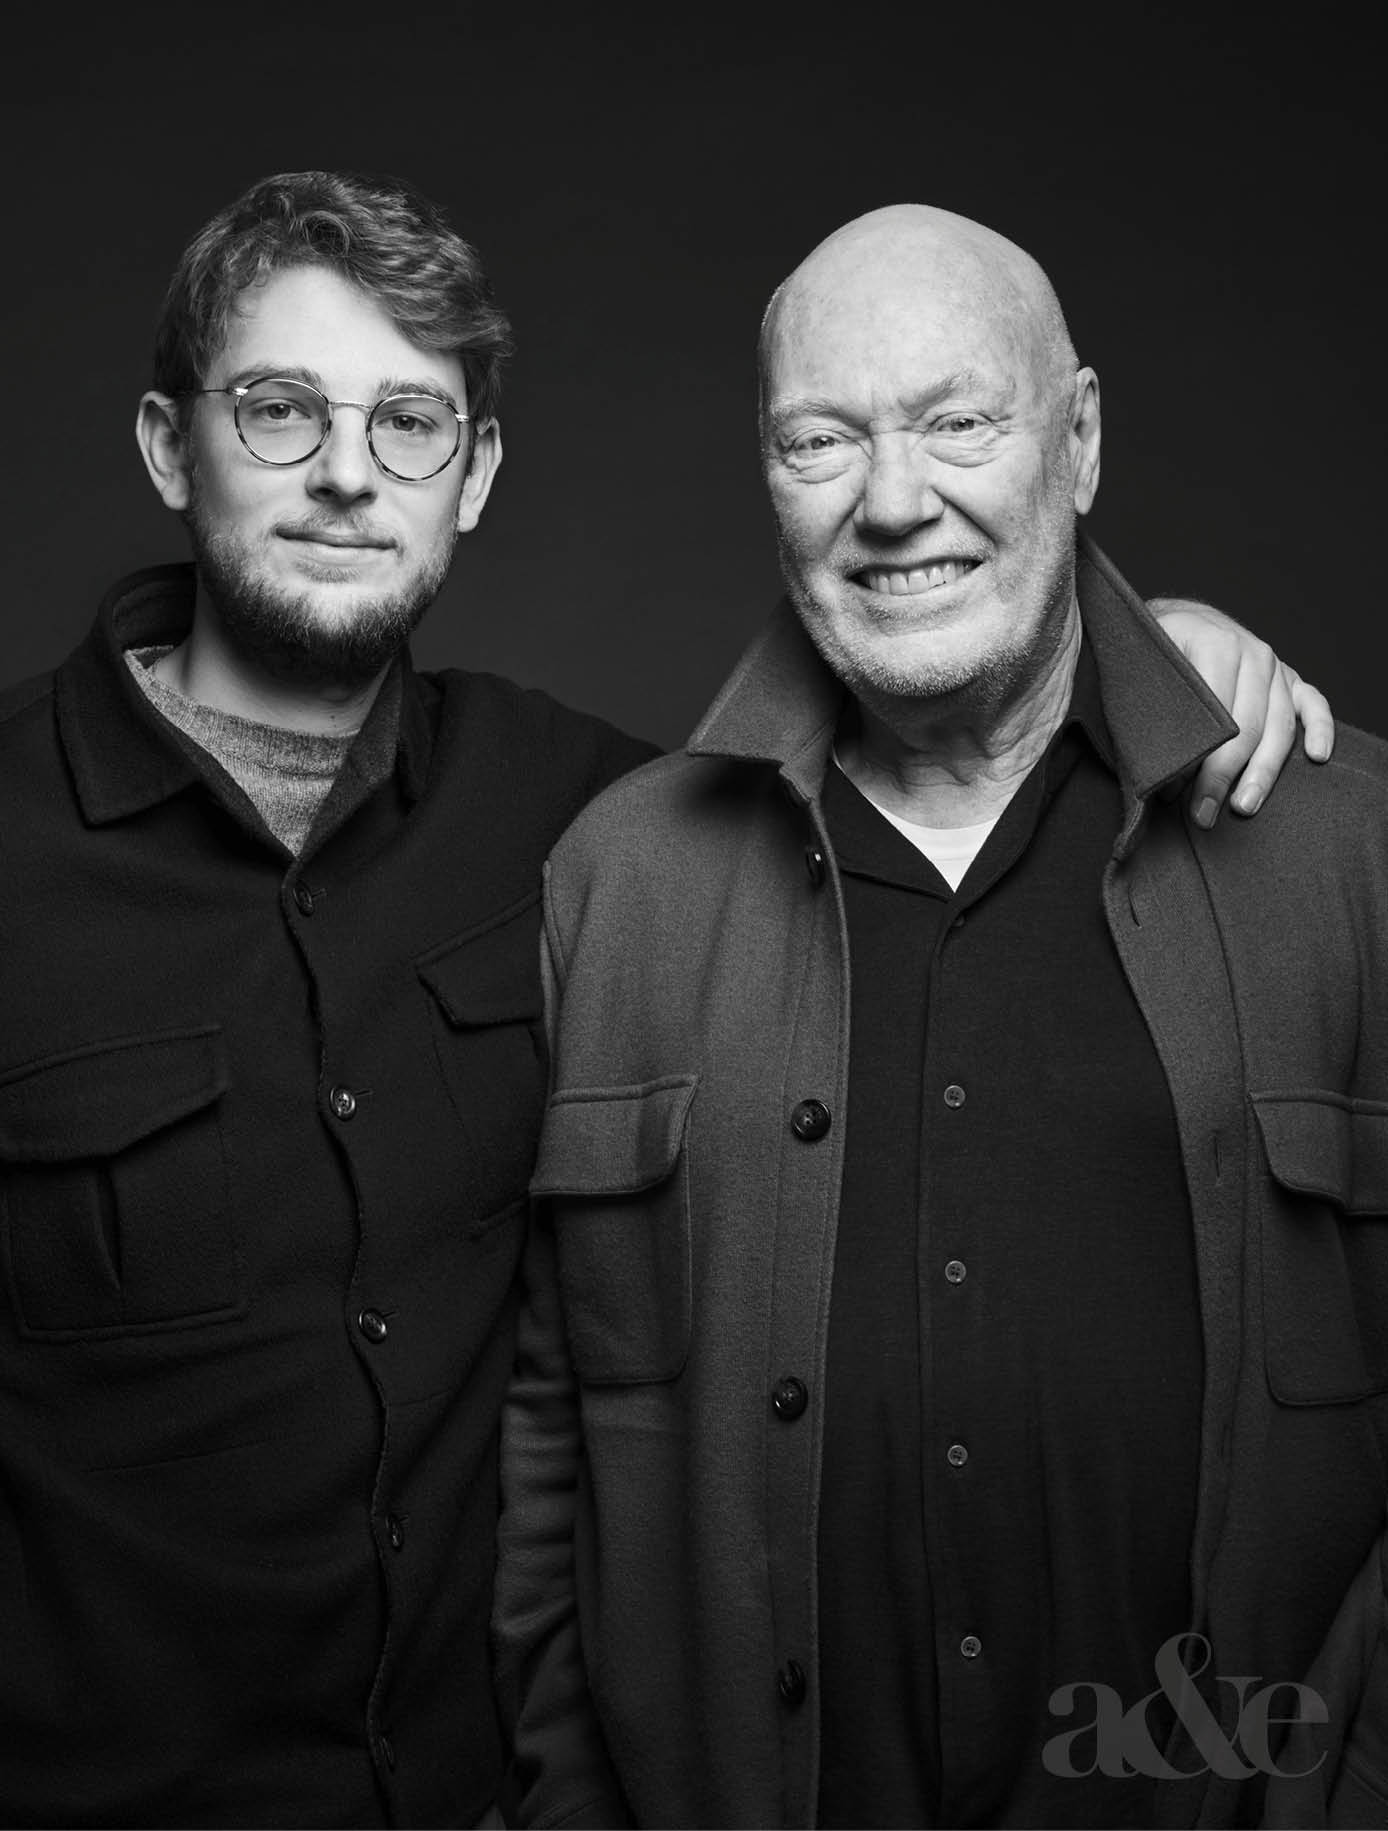 Jean-Claude Biver is no longer the CEO of the LVMH Watchmaking